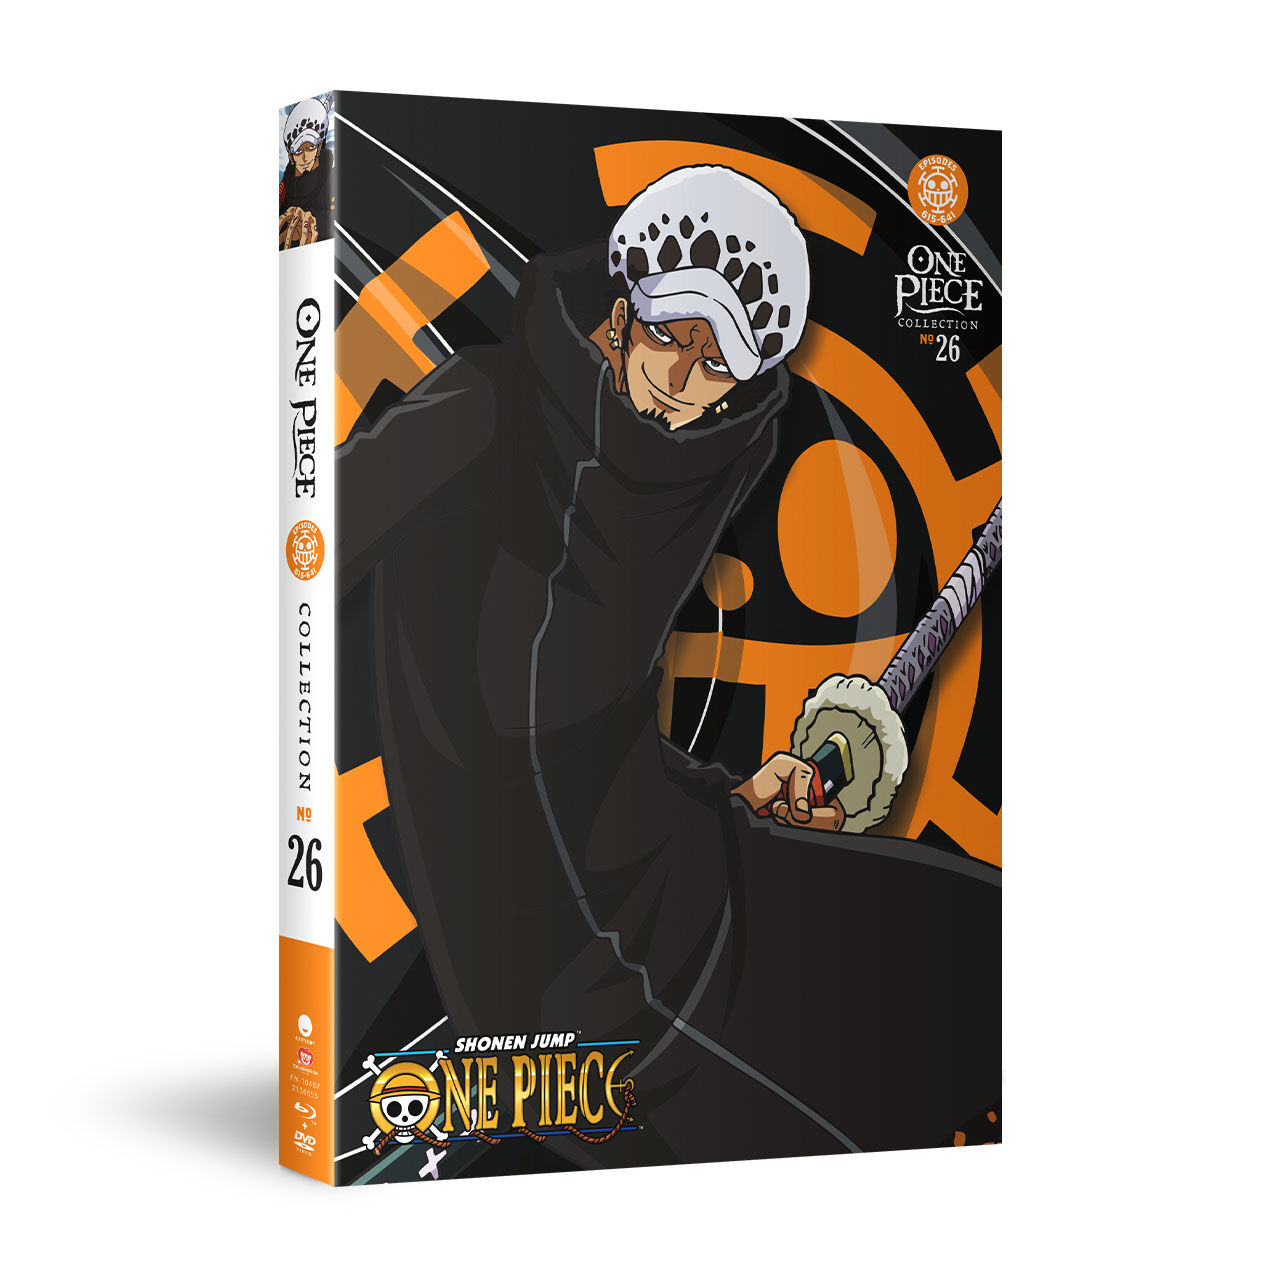 One Piece - Collection 26 - Blu-ray + DVD | Crunchyroll Store